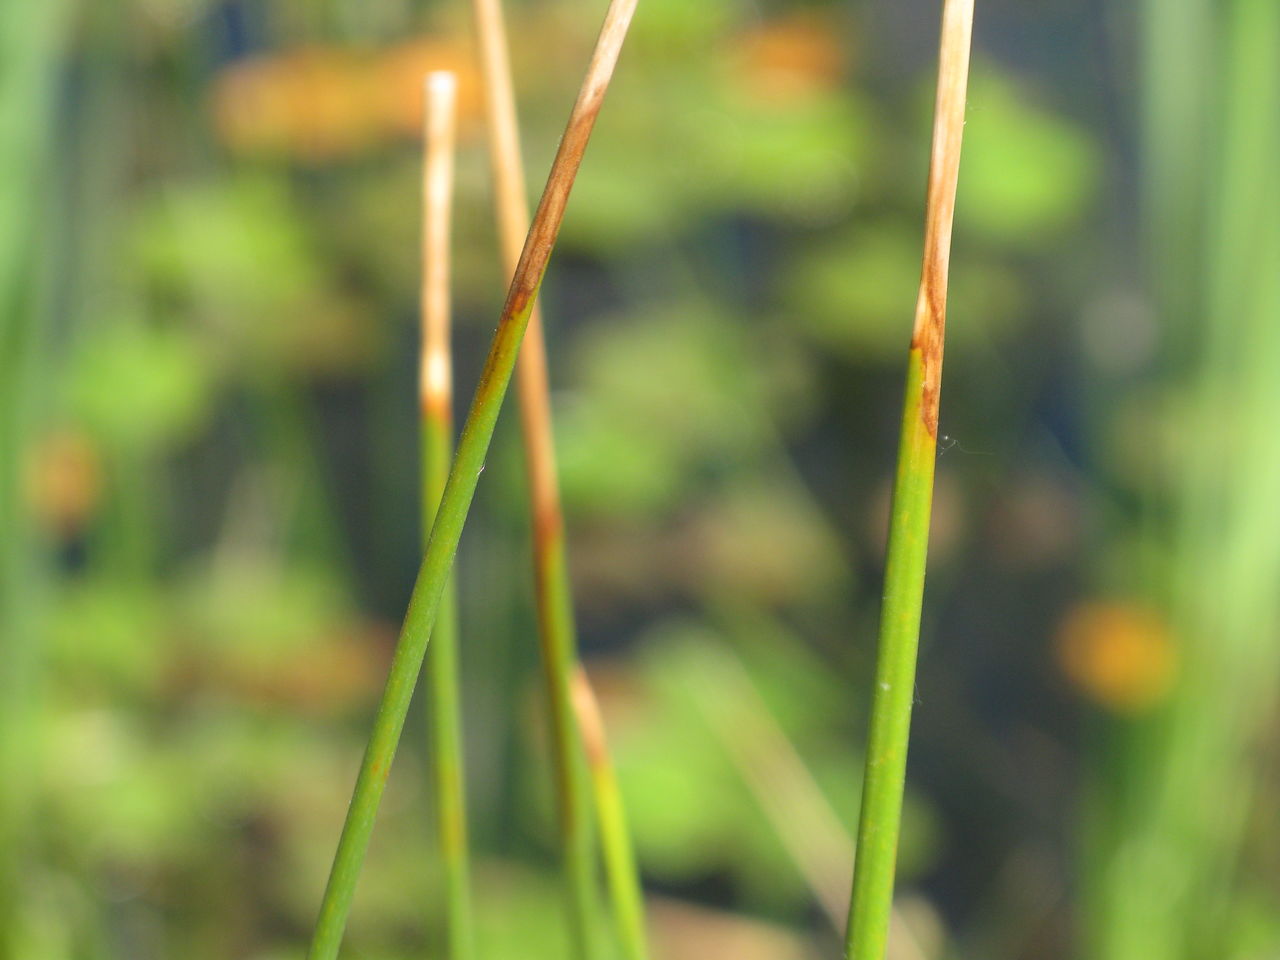 plant, growth, green, nature, grass, close-up, no people, focus on foreground, plant stem, beauty in nature, flower, day, land, leaf, field, outdoors, selective focus, blade of grass, meadow, macro photography, lawn, freshness, prairie, tranquility, sunlight, plant part, water, wet, environment